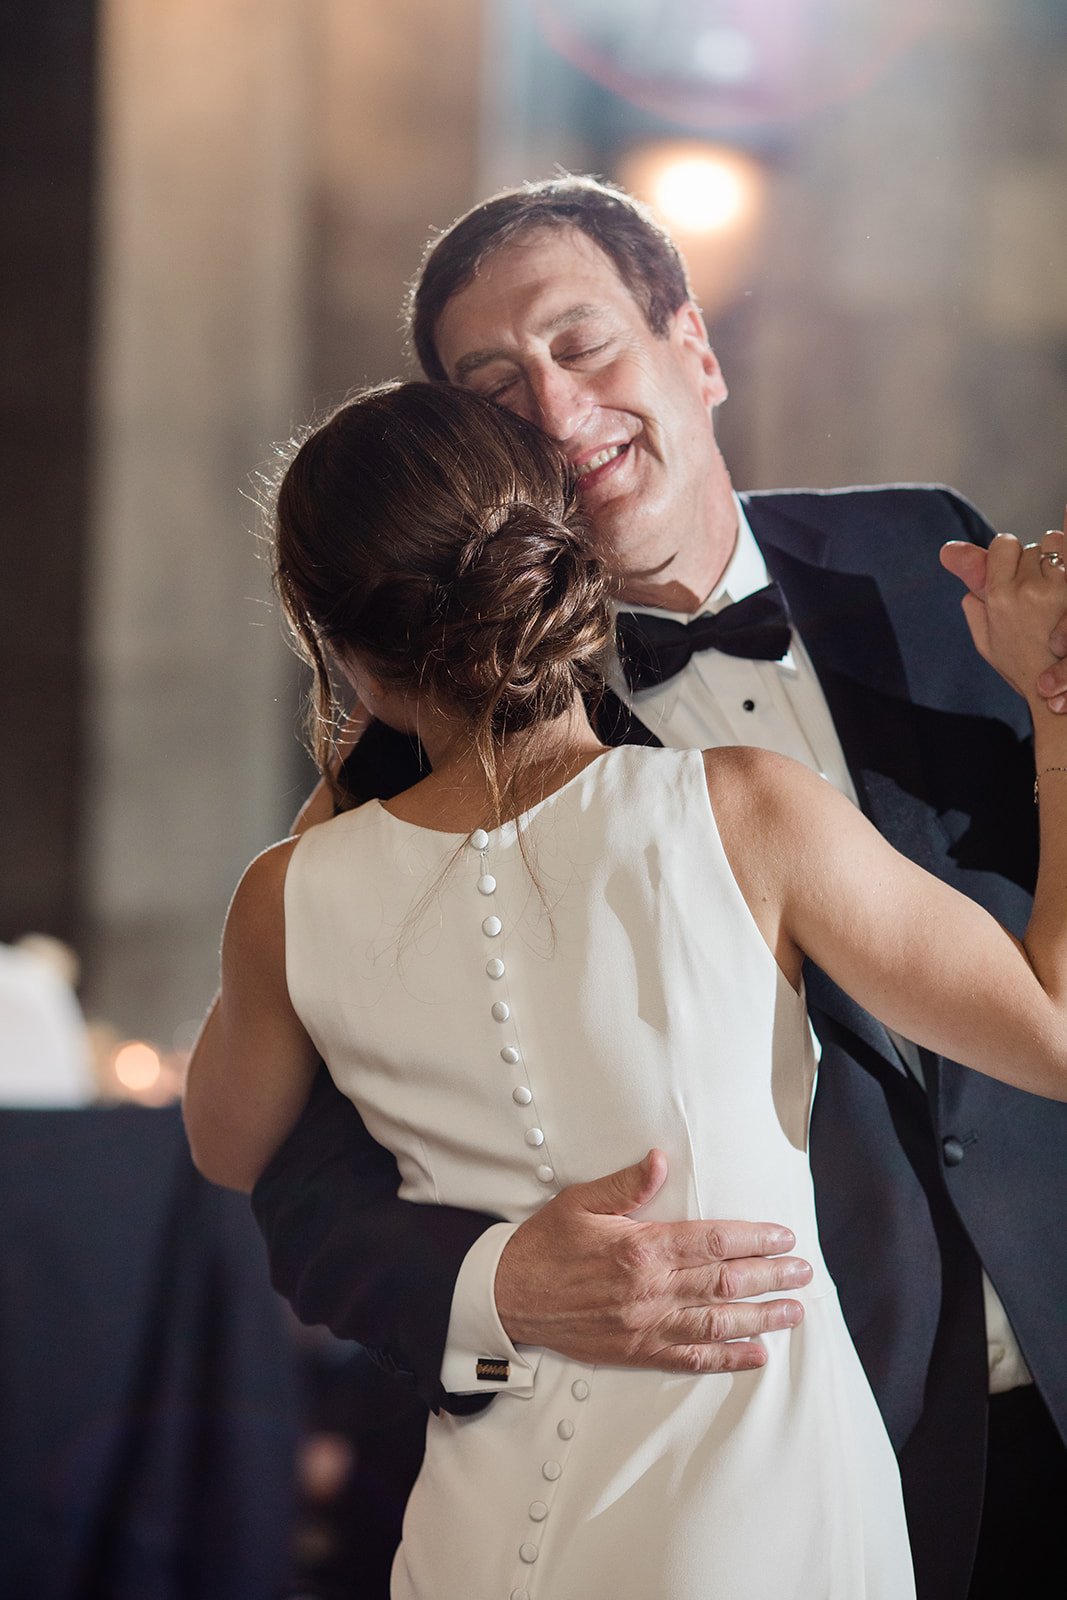 Bride and her father dancing